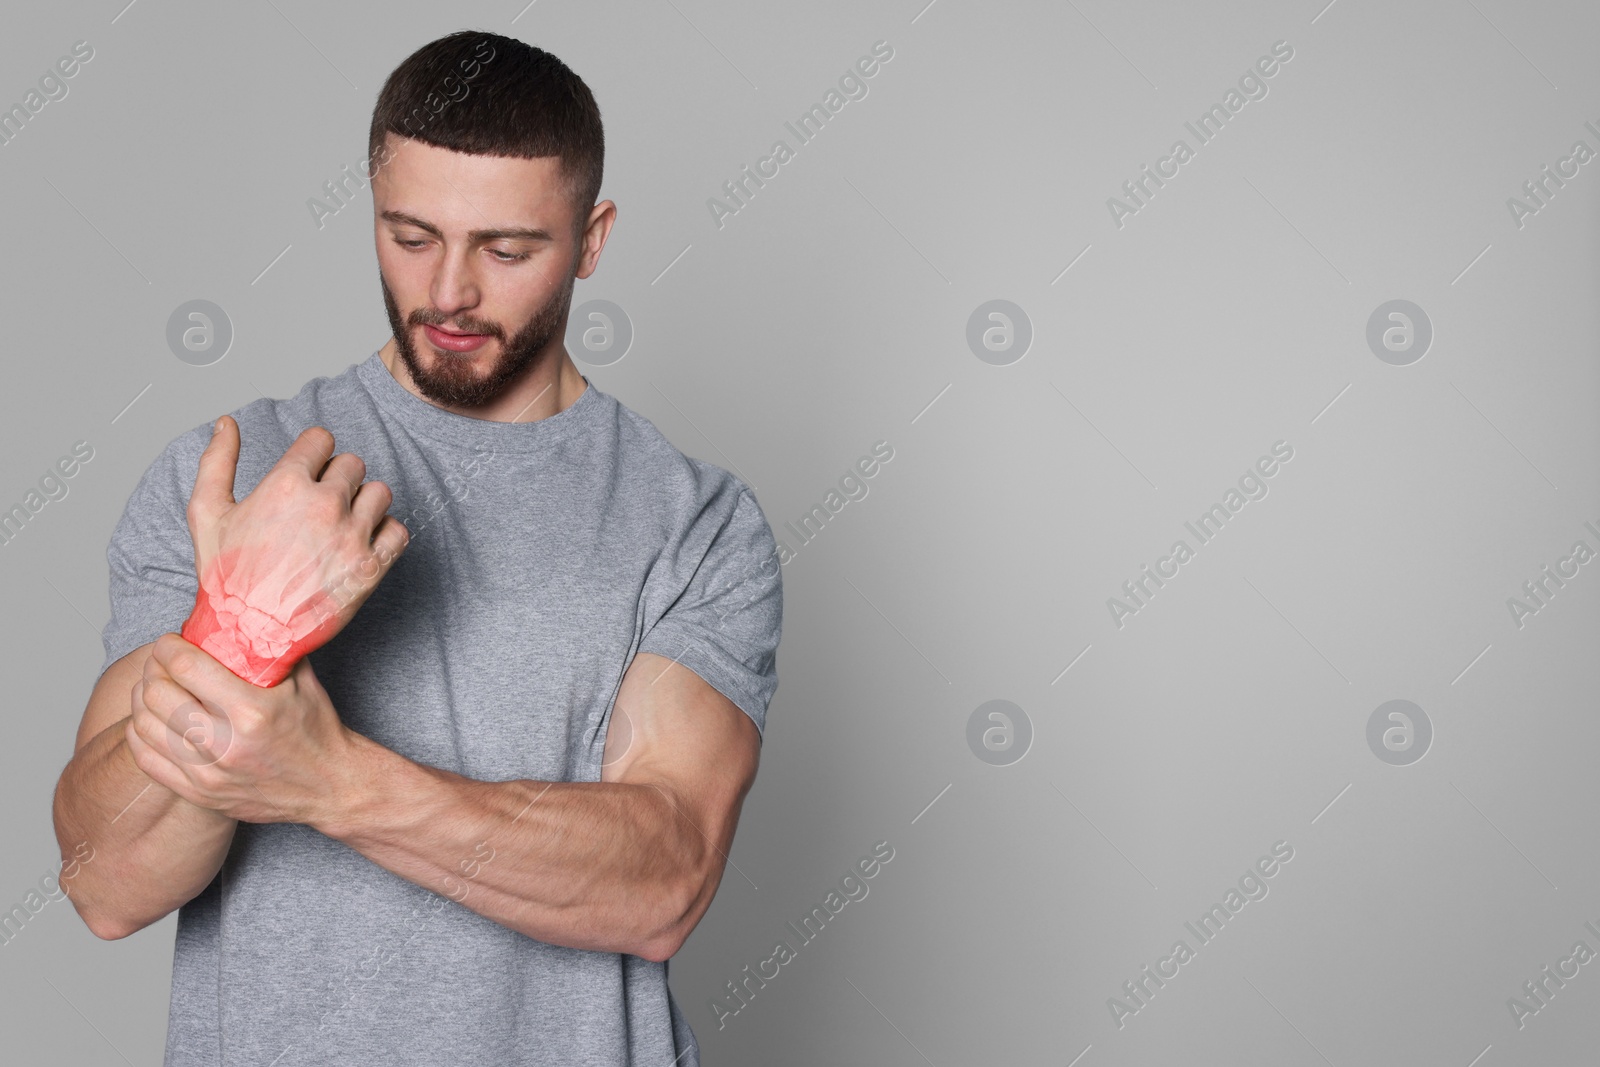 Image of Arthritis symptoms. Man suffering from pain in his wrist on light grey background, space for text